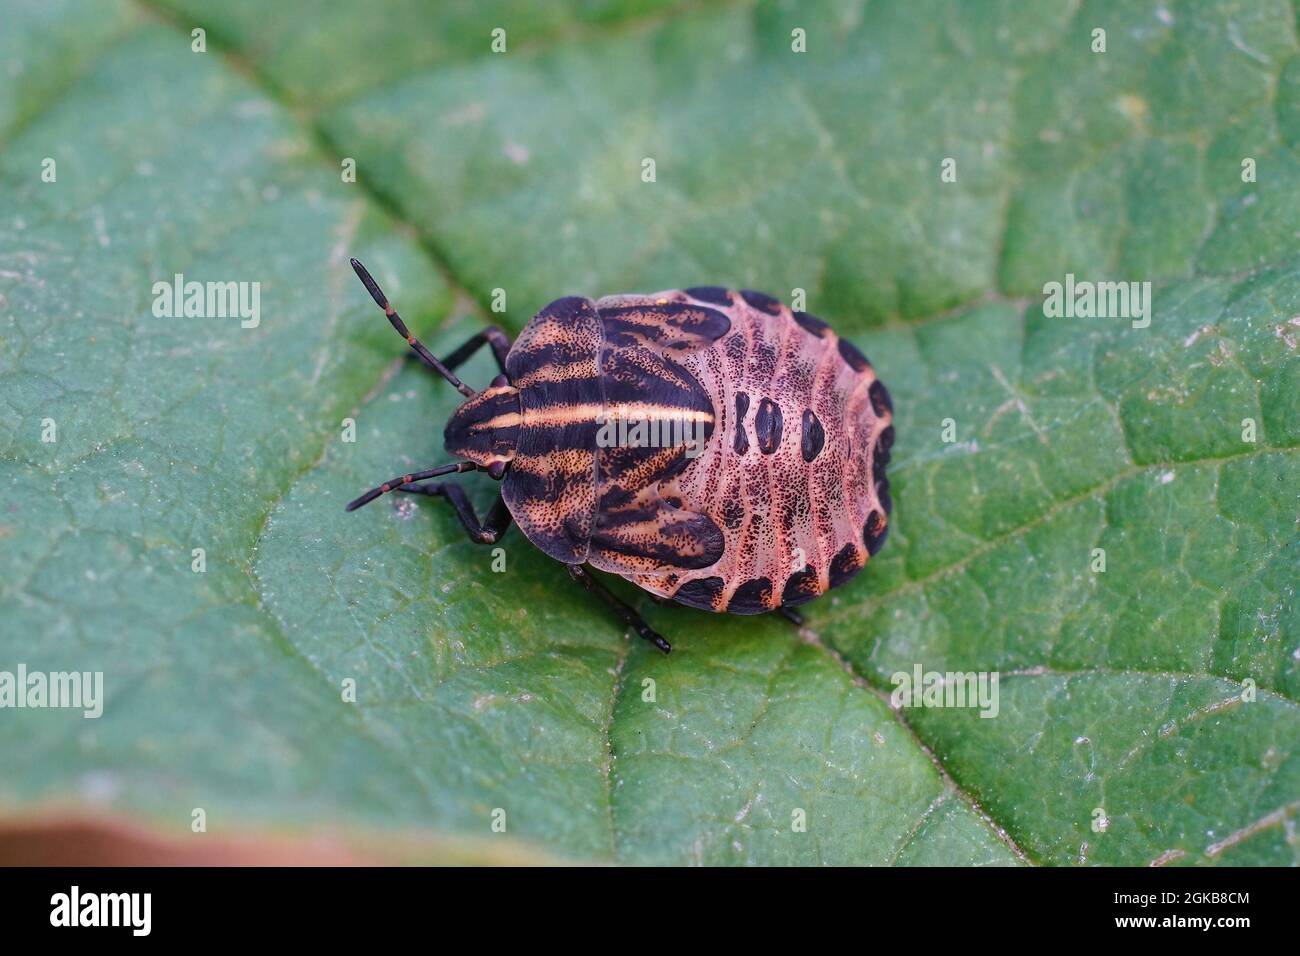 Closeup on a nymph of the striped bug, Graphosoma lineatum Stock Photo